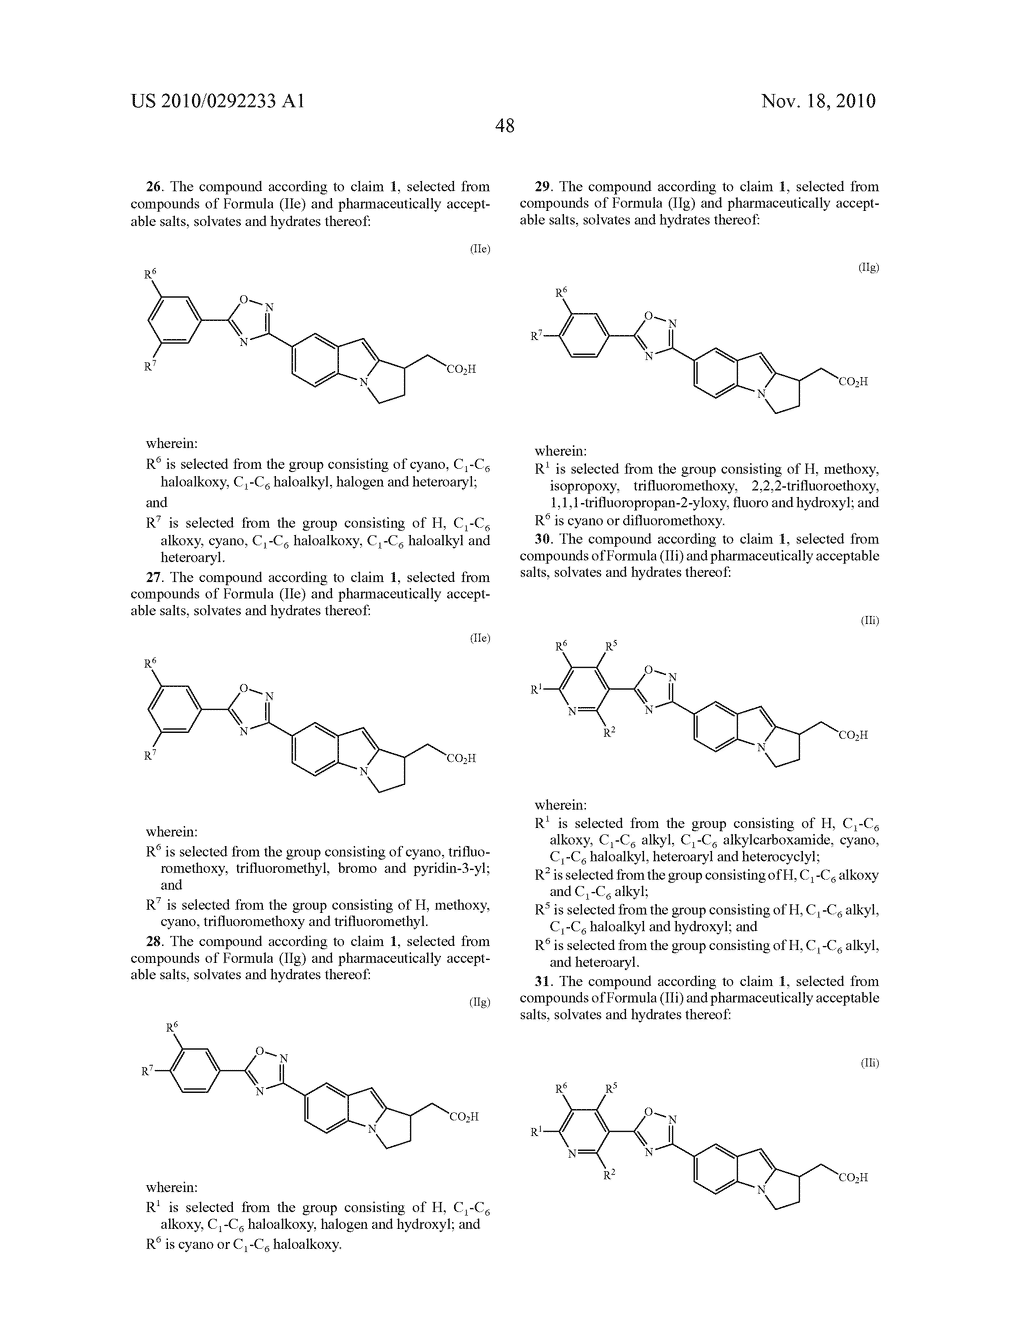 DIHYDRO-1H-PYRROLO[1,2-A]INDOL-1-YL CARBOXYLIC ACID DERIVATIVES WHICH ACT AS S1P1 AGONISTS - diagram, schematic, and image 61